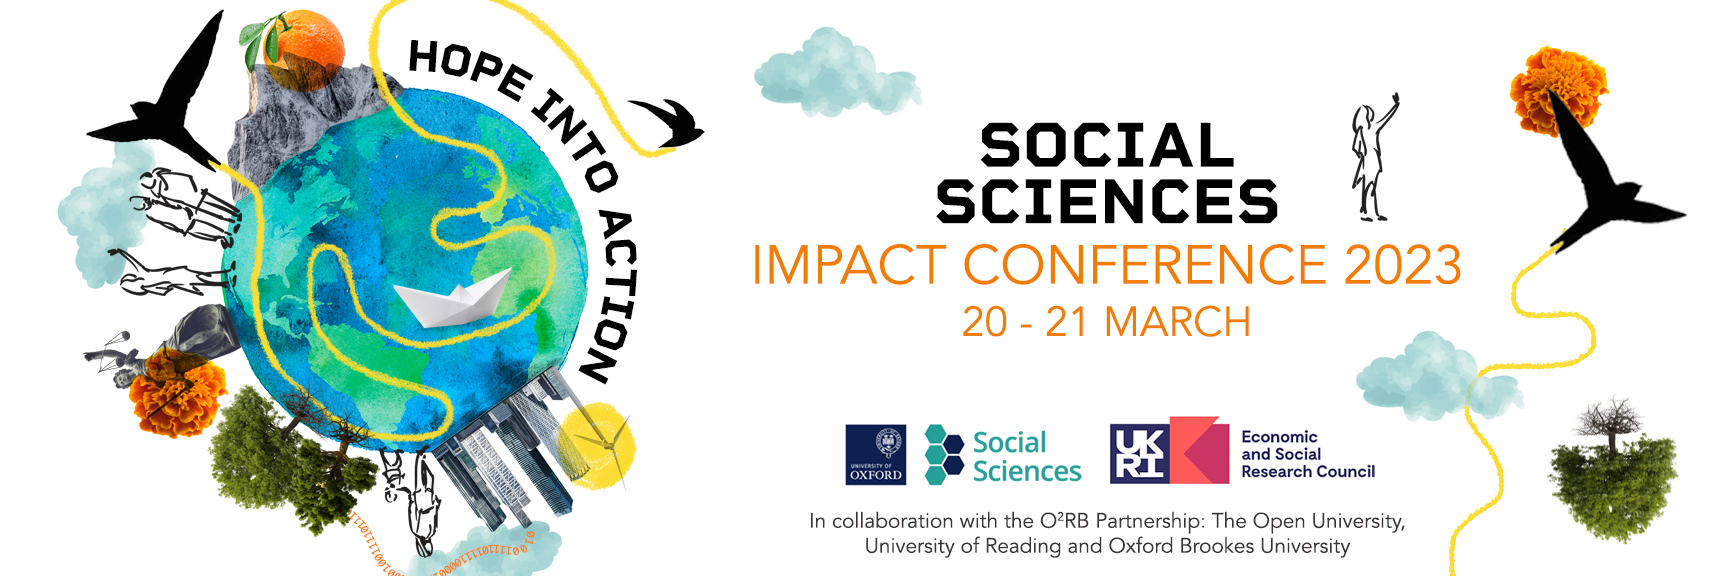 'Hope into action' Social Sciences Impact Conference 2023, 20–21 March.